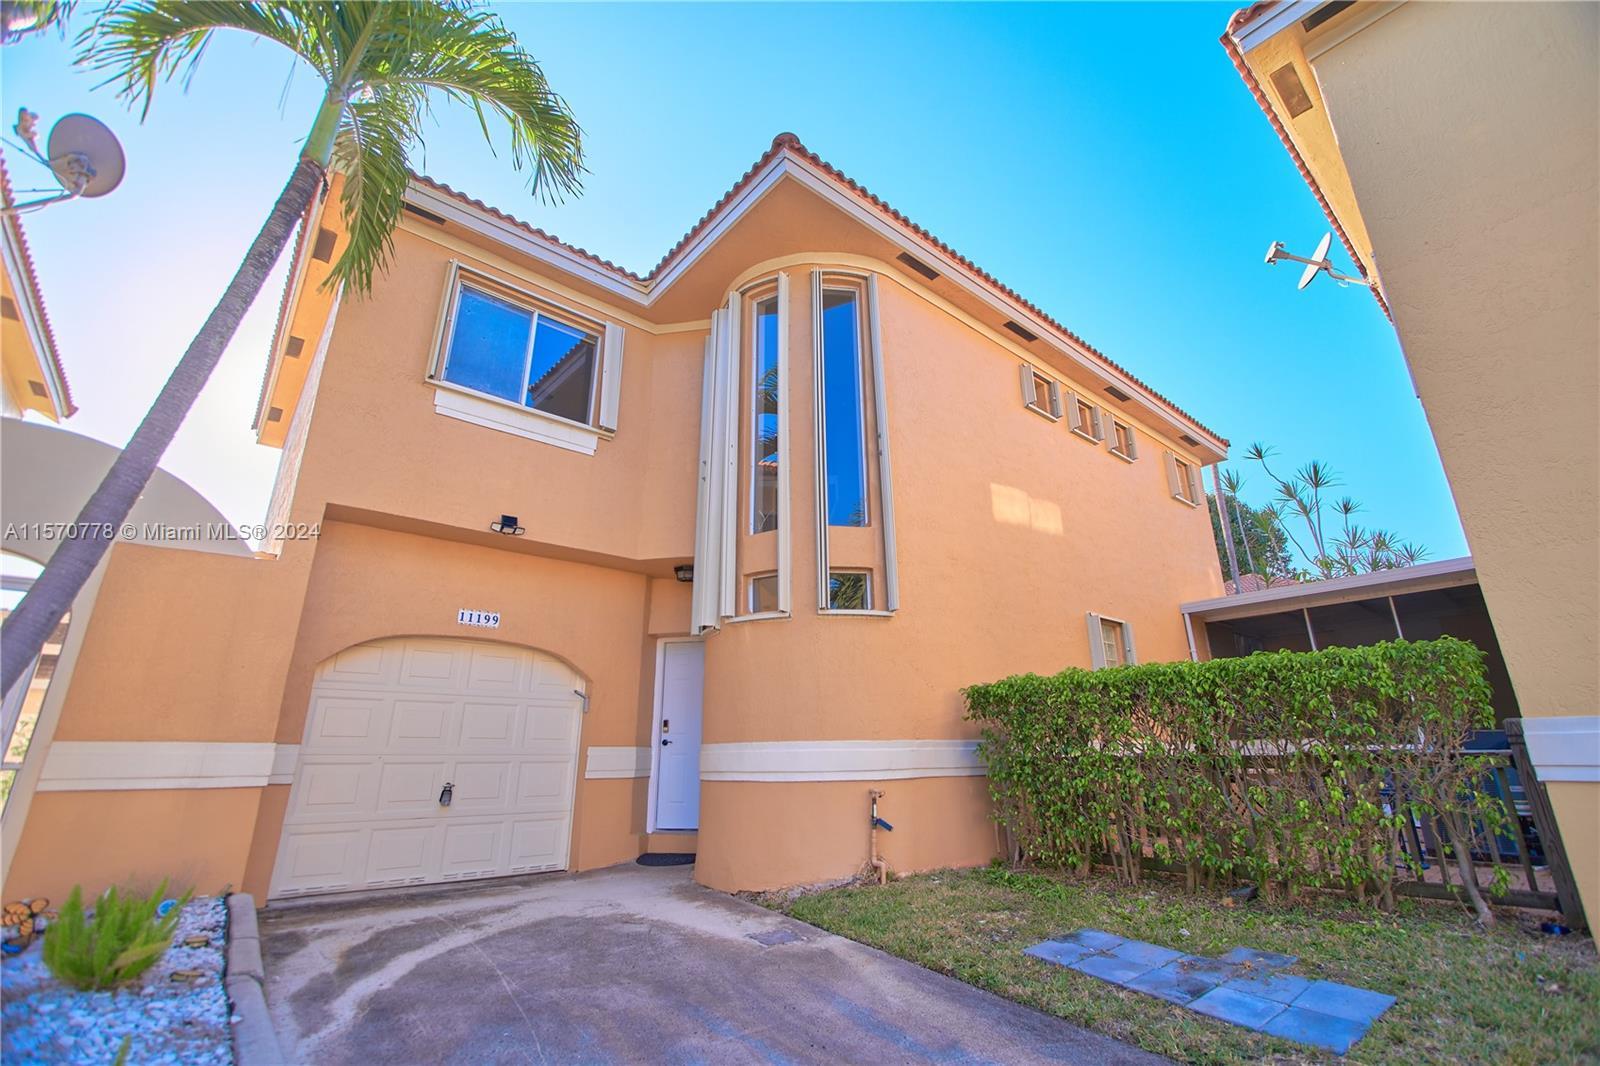 Photo of 11199 Lakeview Dr in Coral Springs, FL